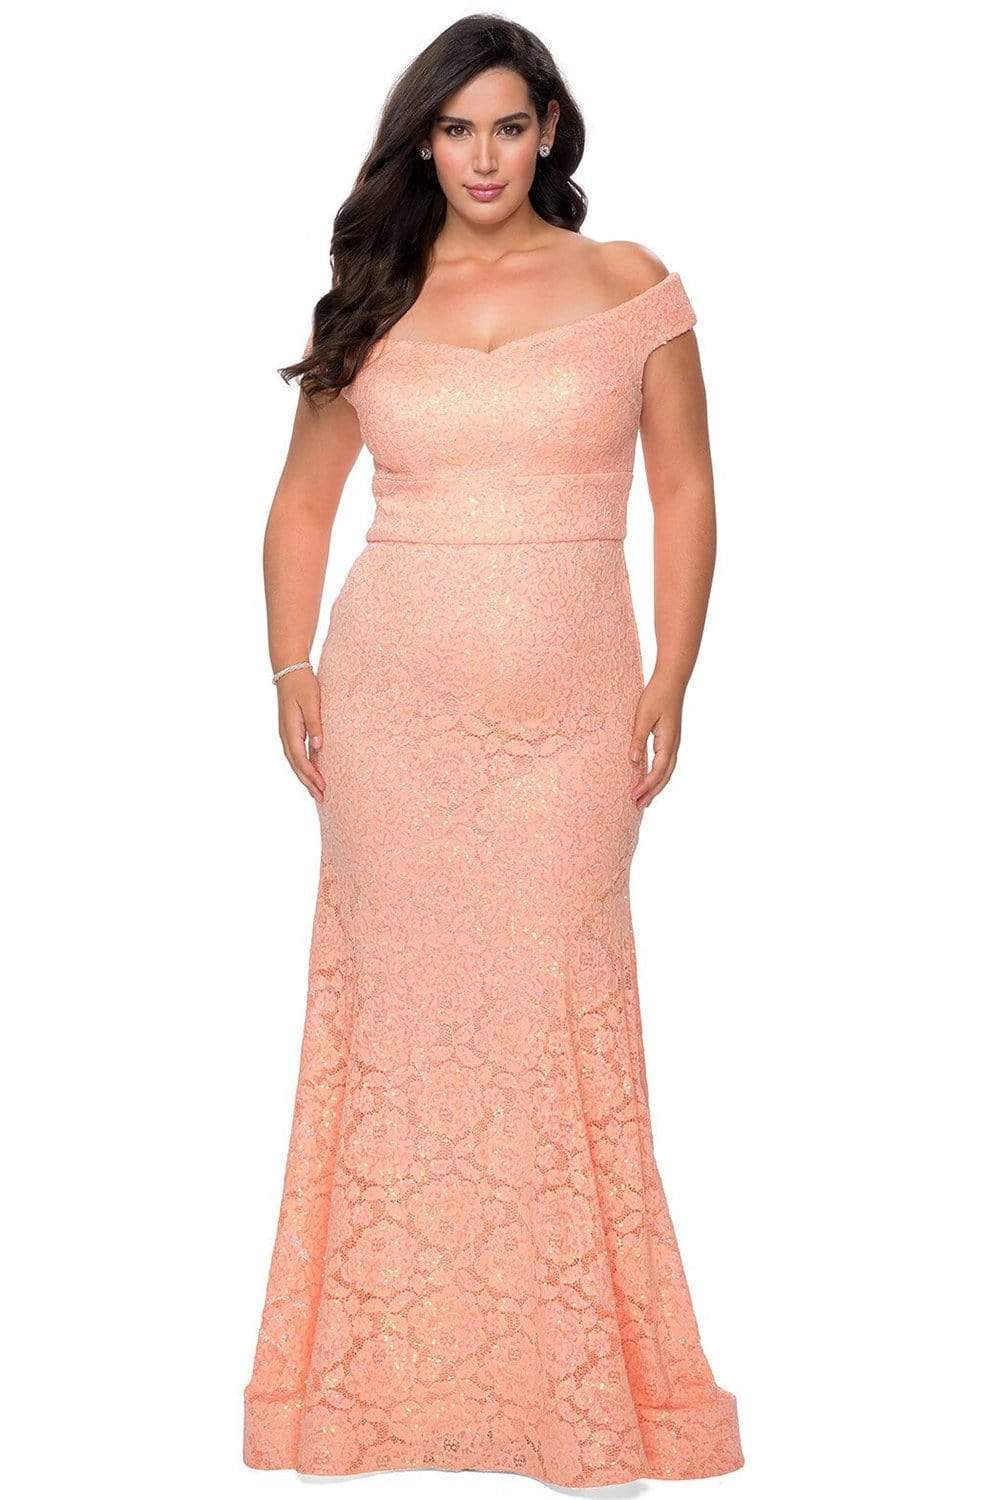 La Femme - 28883 Off Shoulder Beaded Allover Lace Mermaid Gown Prom Dresses 12W / Peach